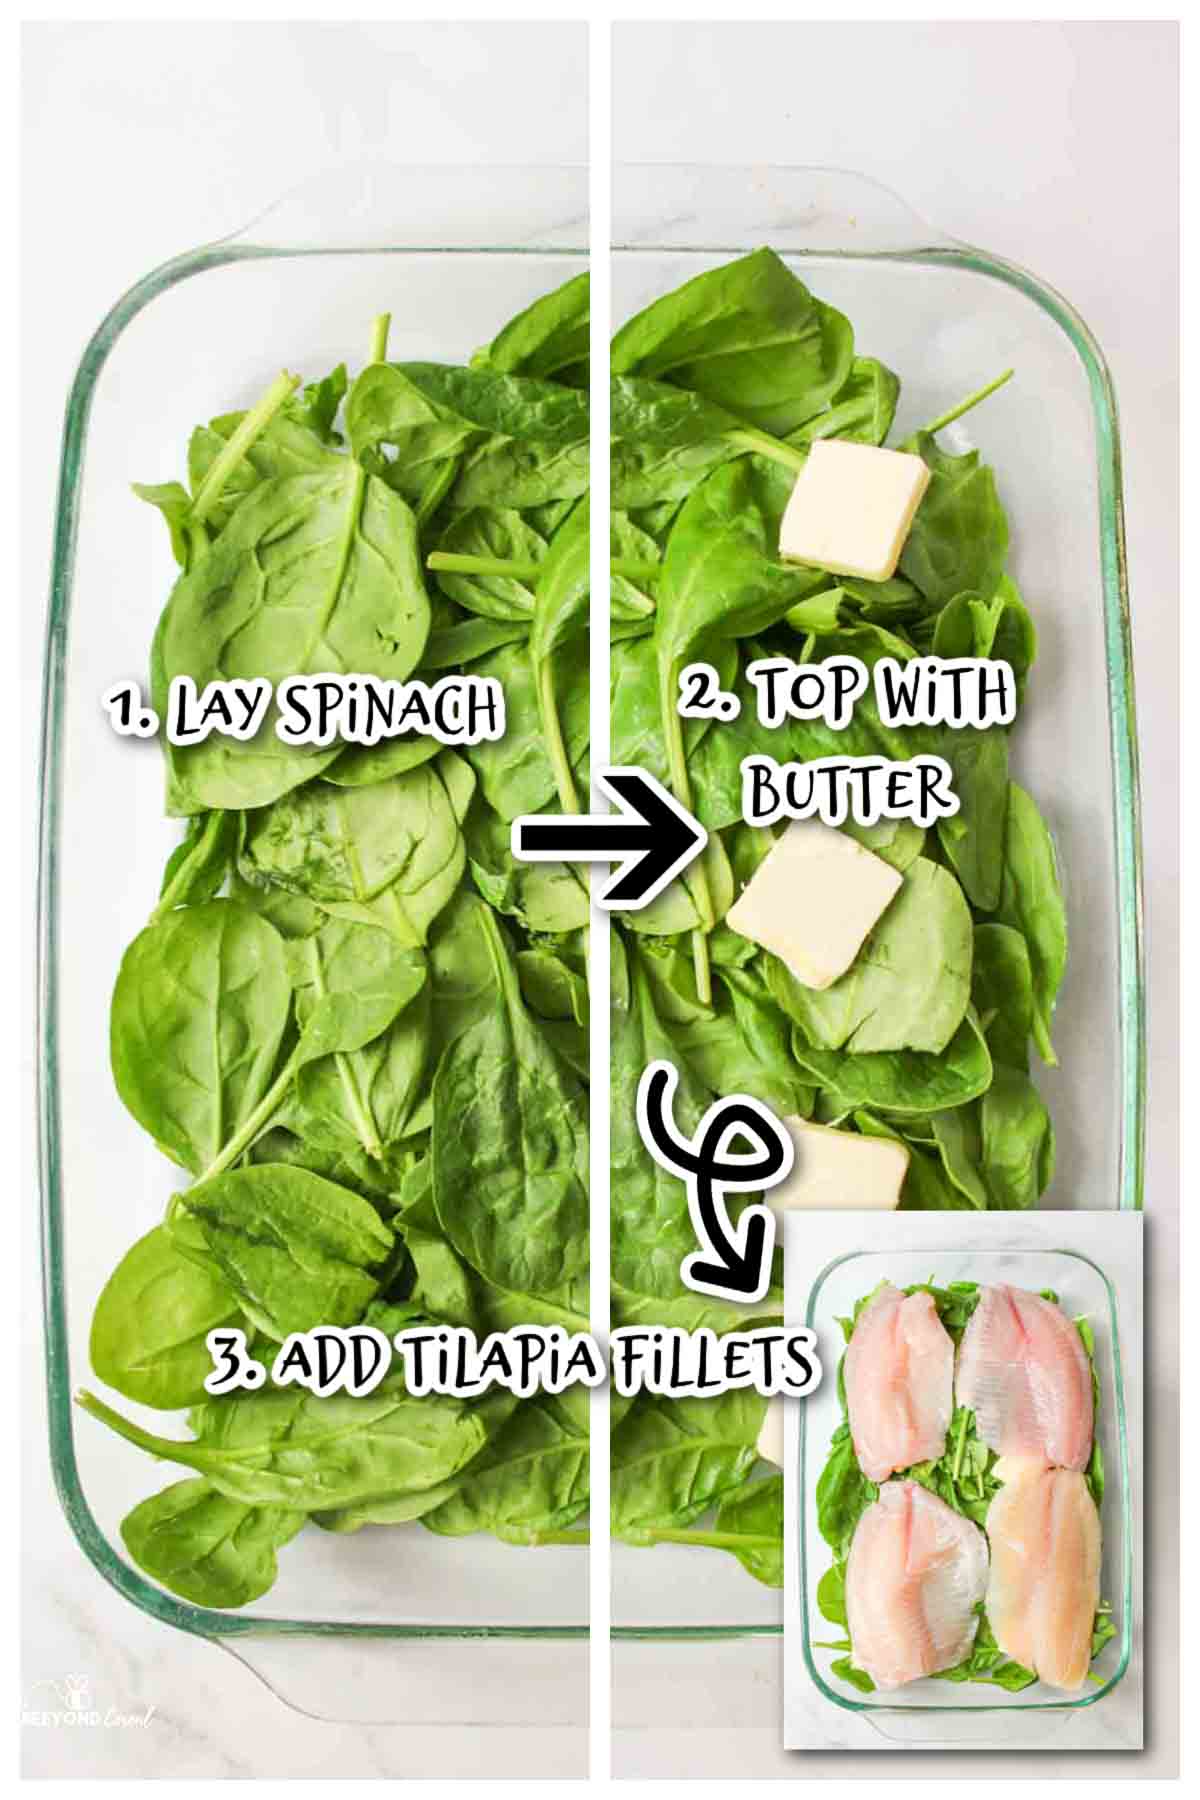 first 3 steps to make the tilapia dinner, add spinach to baking dish, top with butter, and then add tilapia fillets.